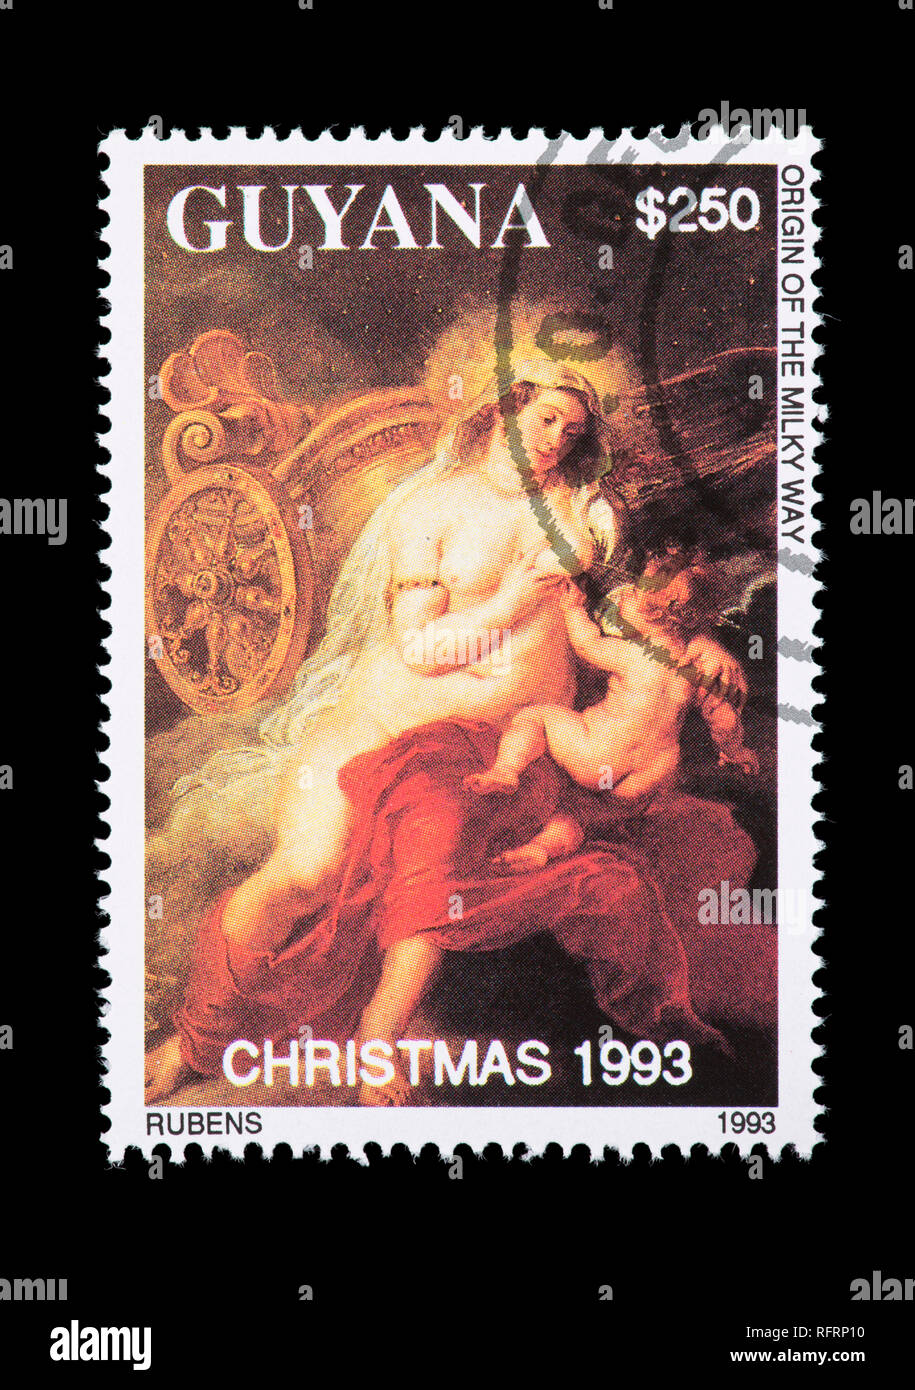 Postage stamp from Guyana depicting the Rubens painting 'Origin of the Milky Way' Stock Photo